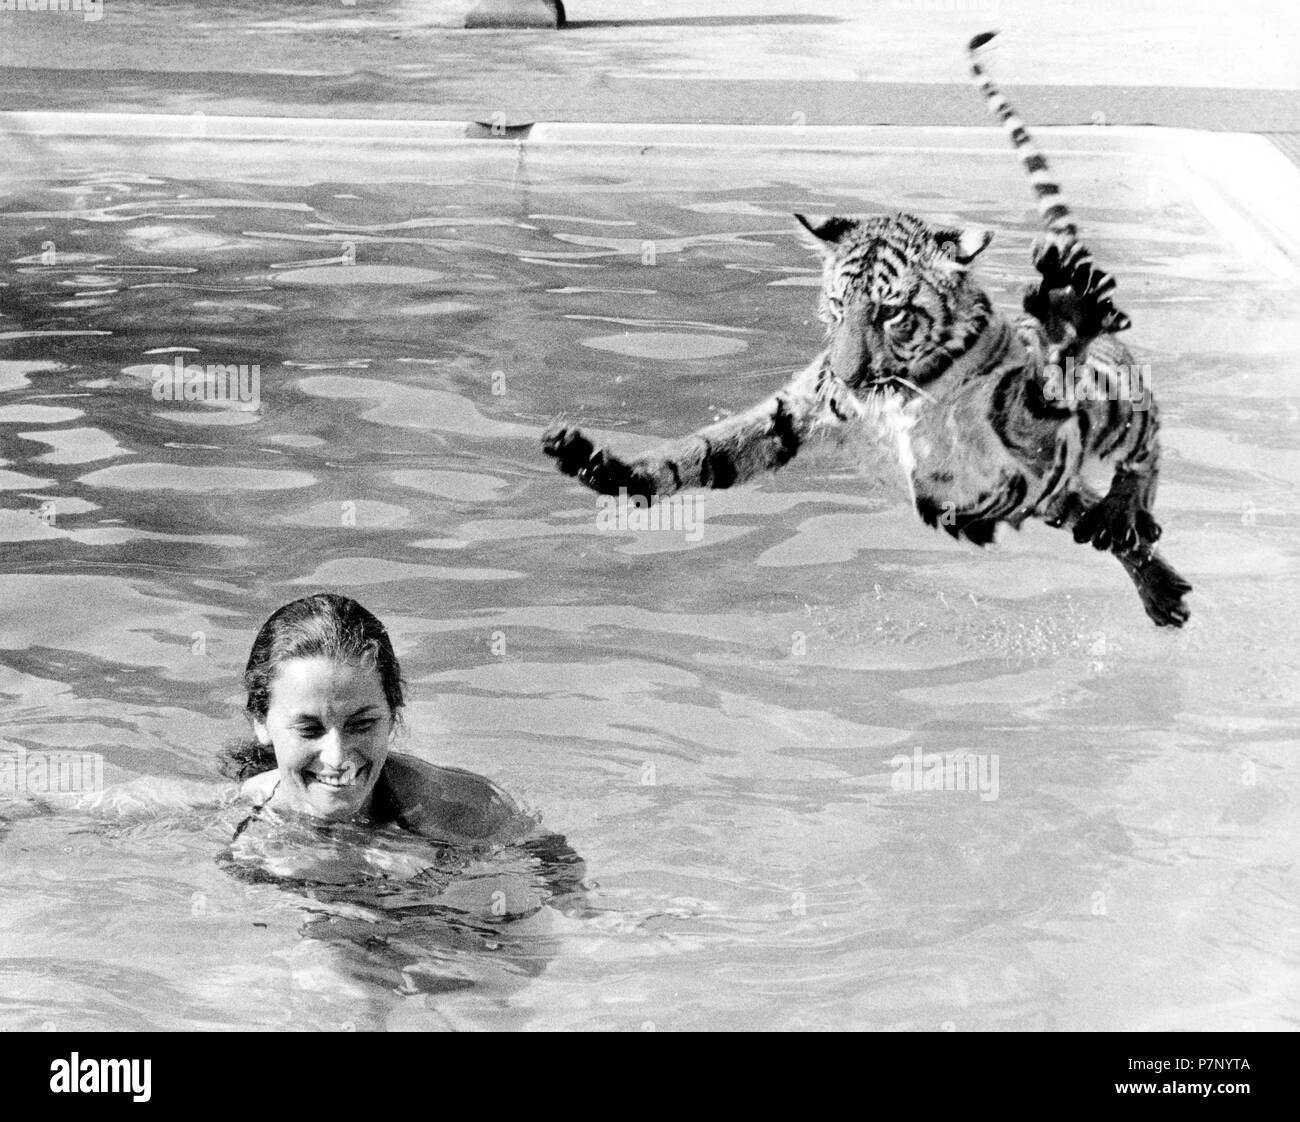 Tiger jumps into the swimming pool, England, Great Britain Stock Photo